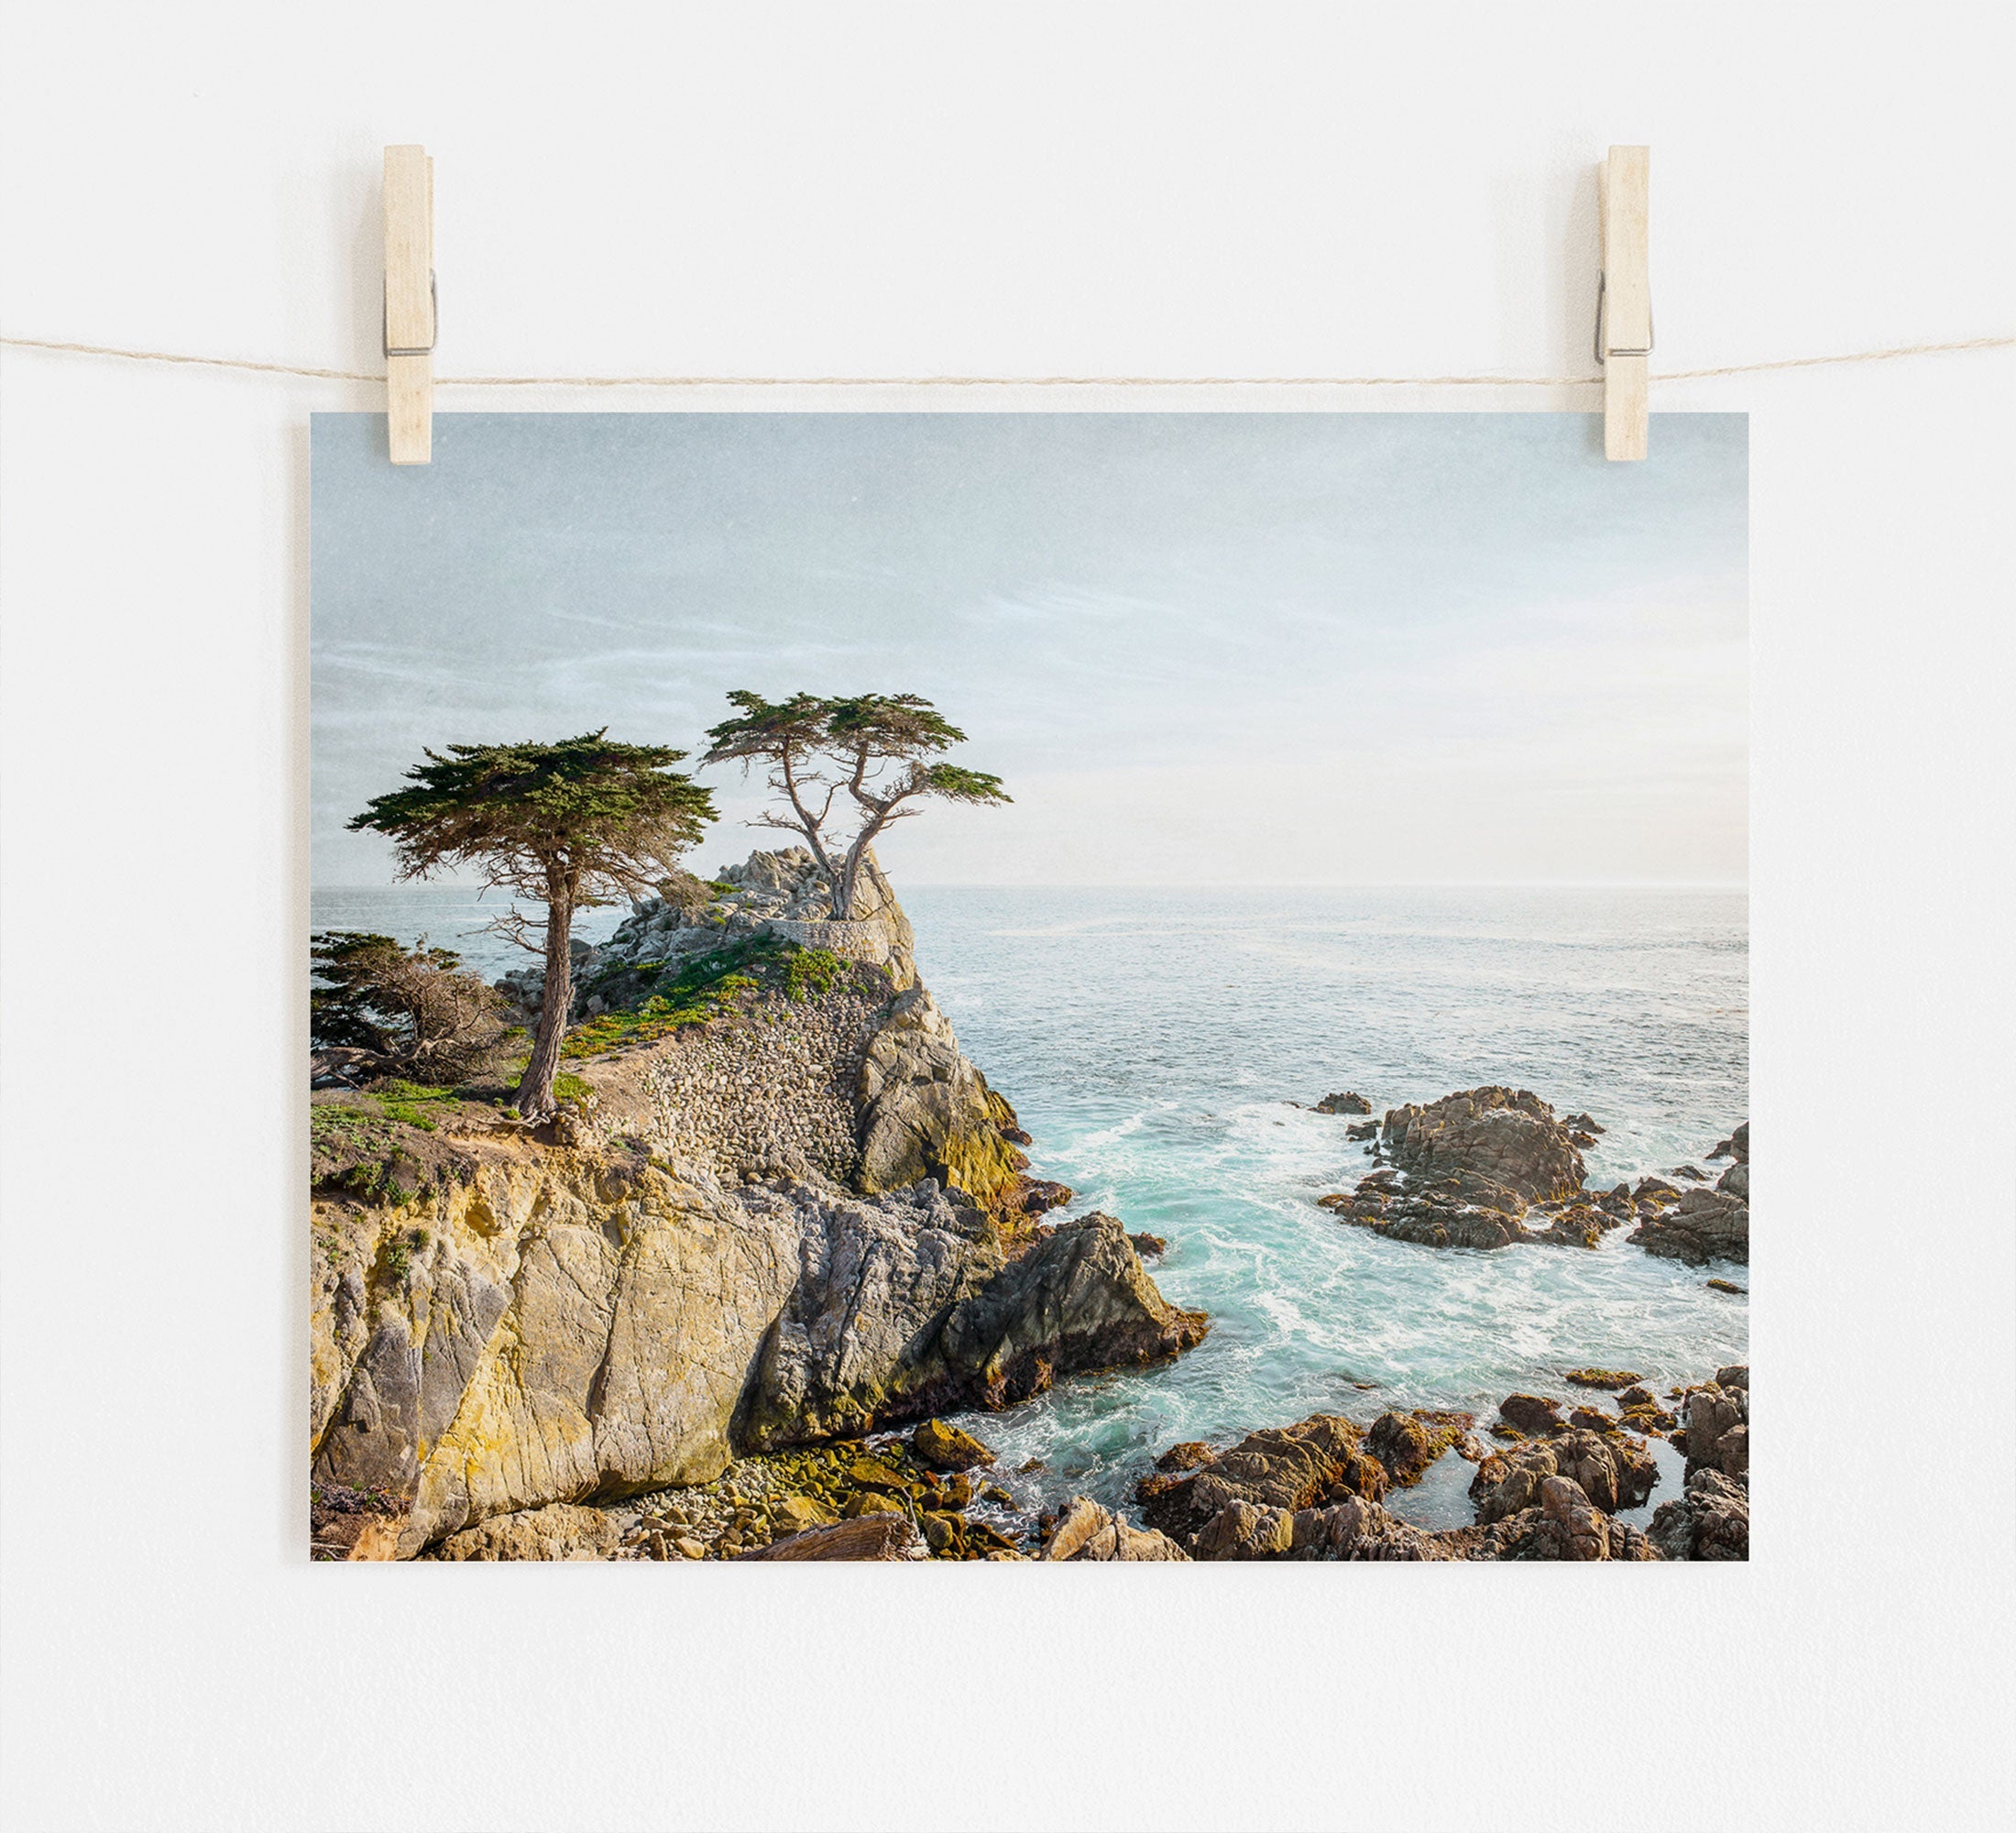 A serene photograph of California Coastal Print, 'Lone Cypress' from Offley Green with two trees atop a cliff overlooking the ocean, pinned to a white wall with wooden clothespins.